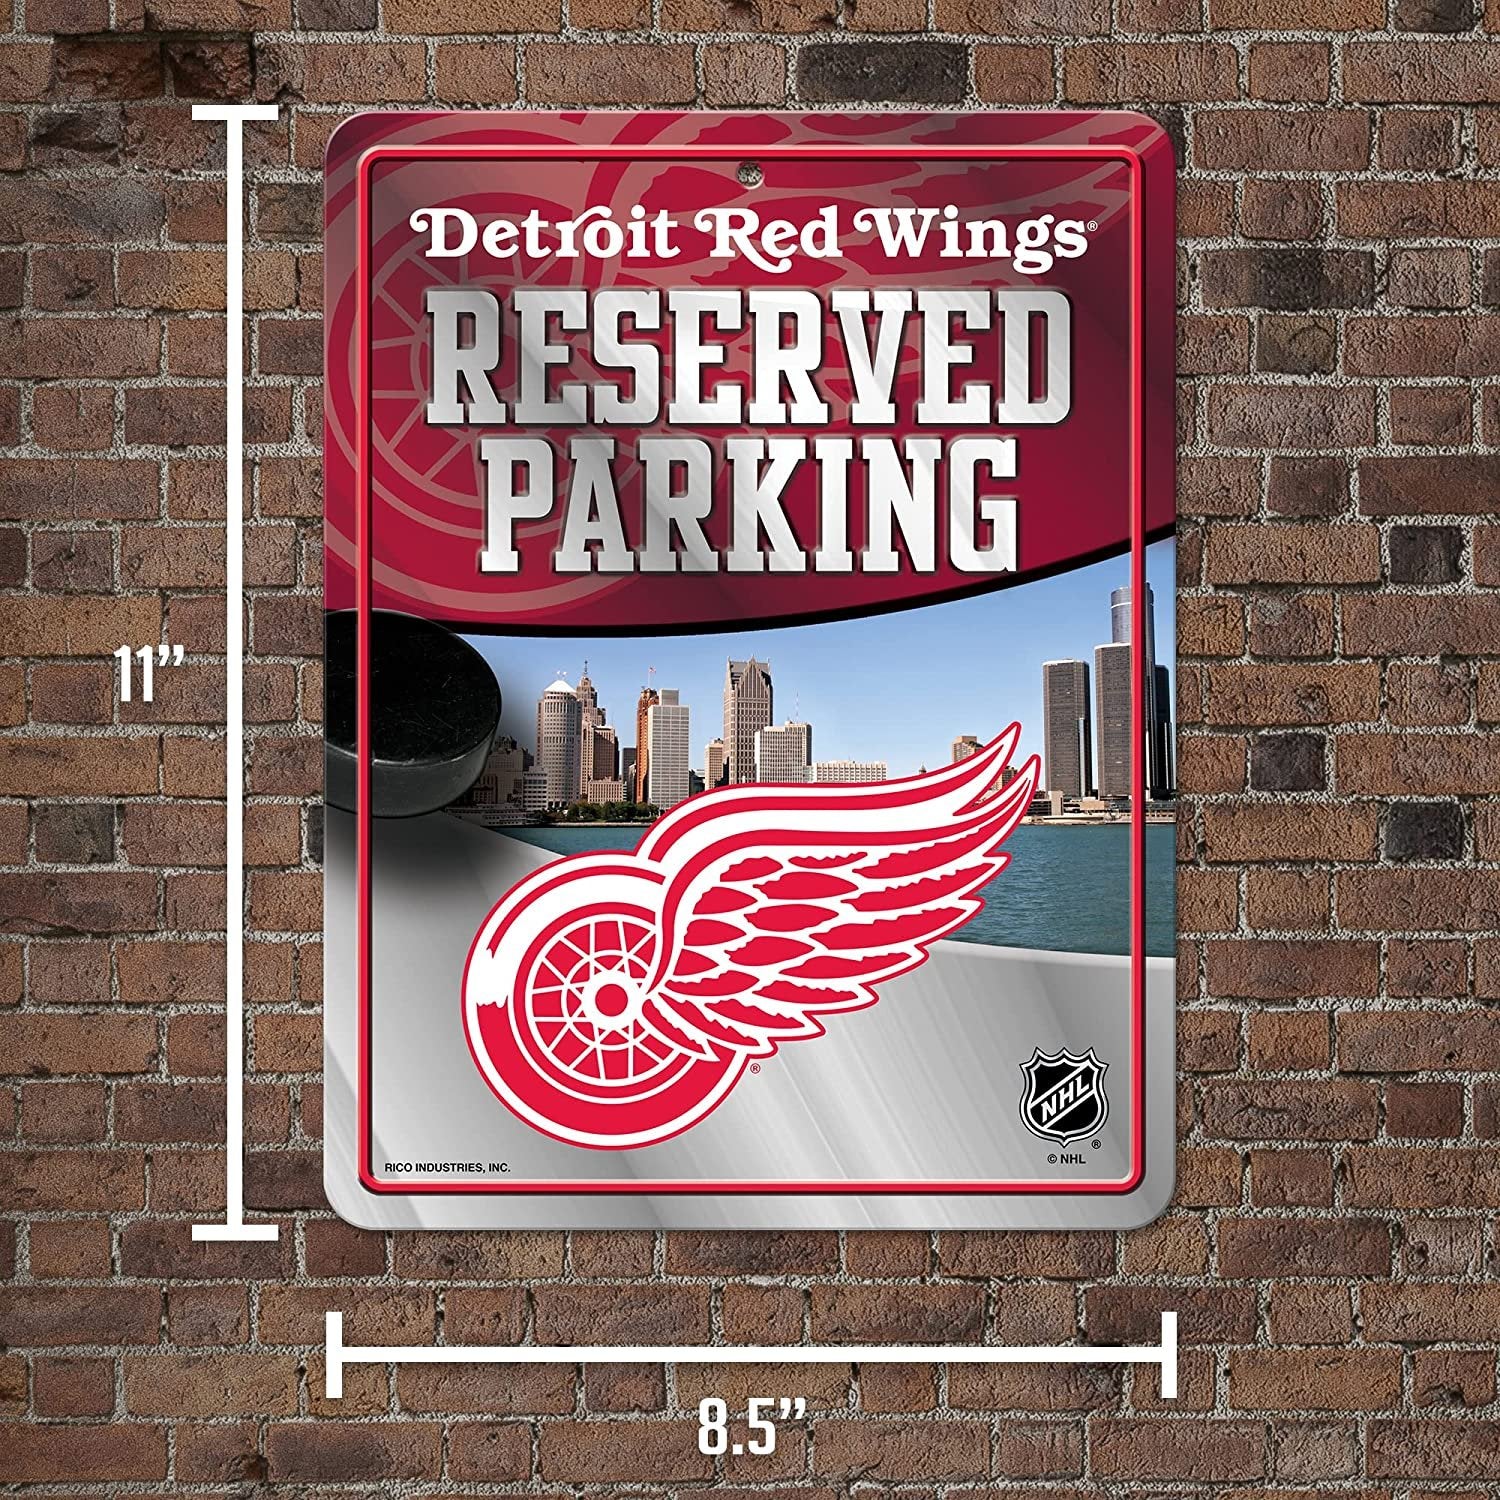 Detroit Red Wings Metal Parking Novelty Wall Sign 8.5 x 11 Inch